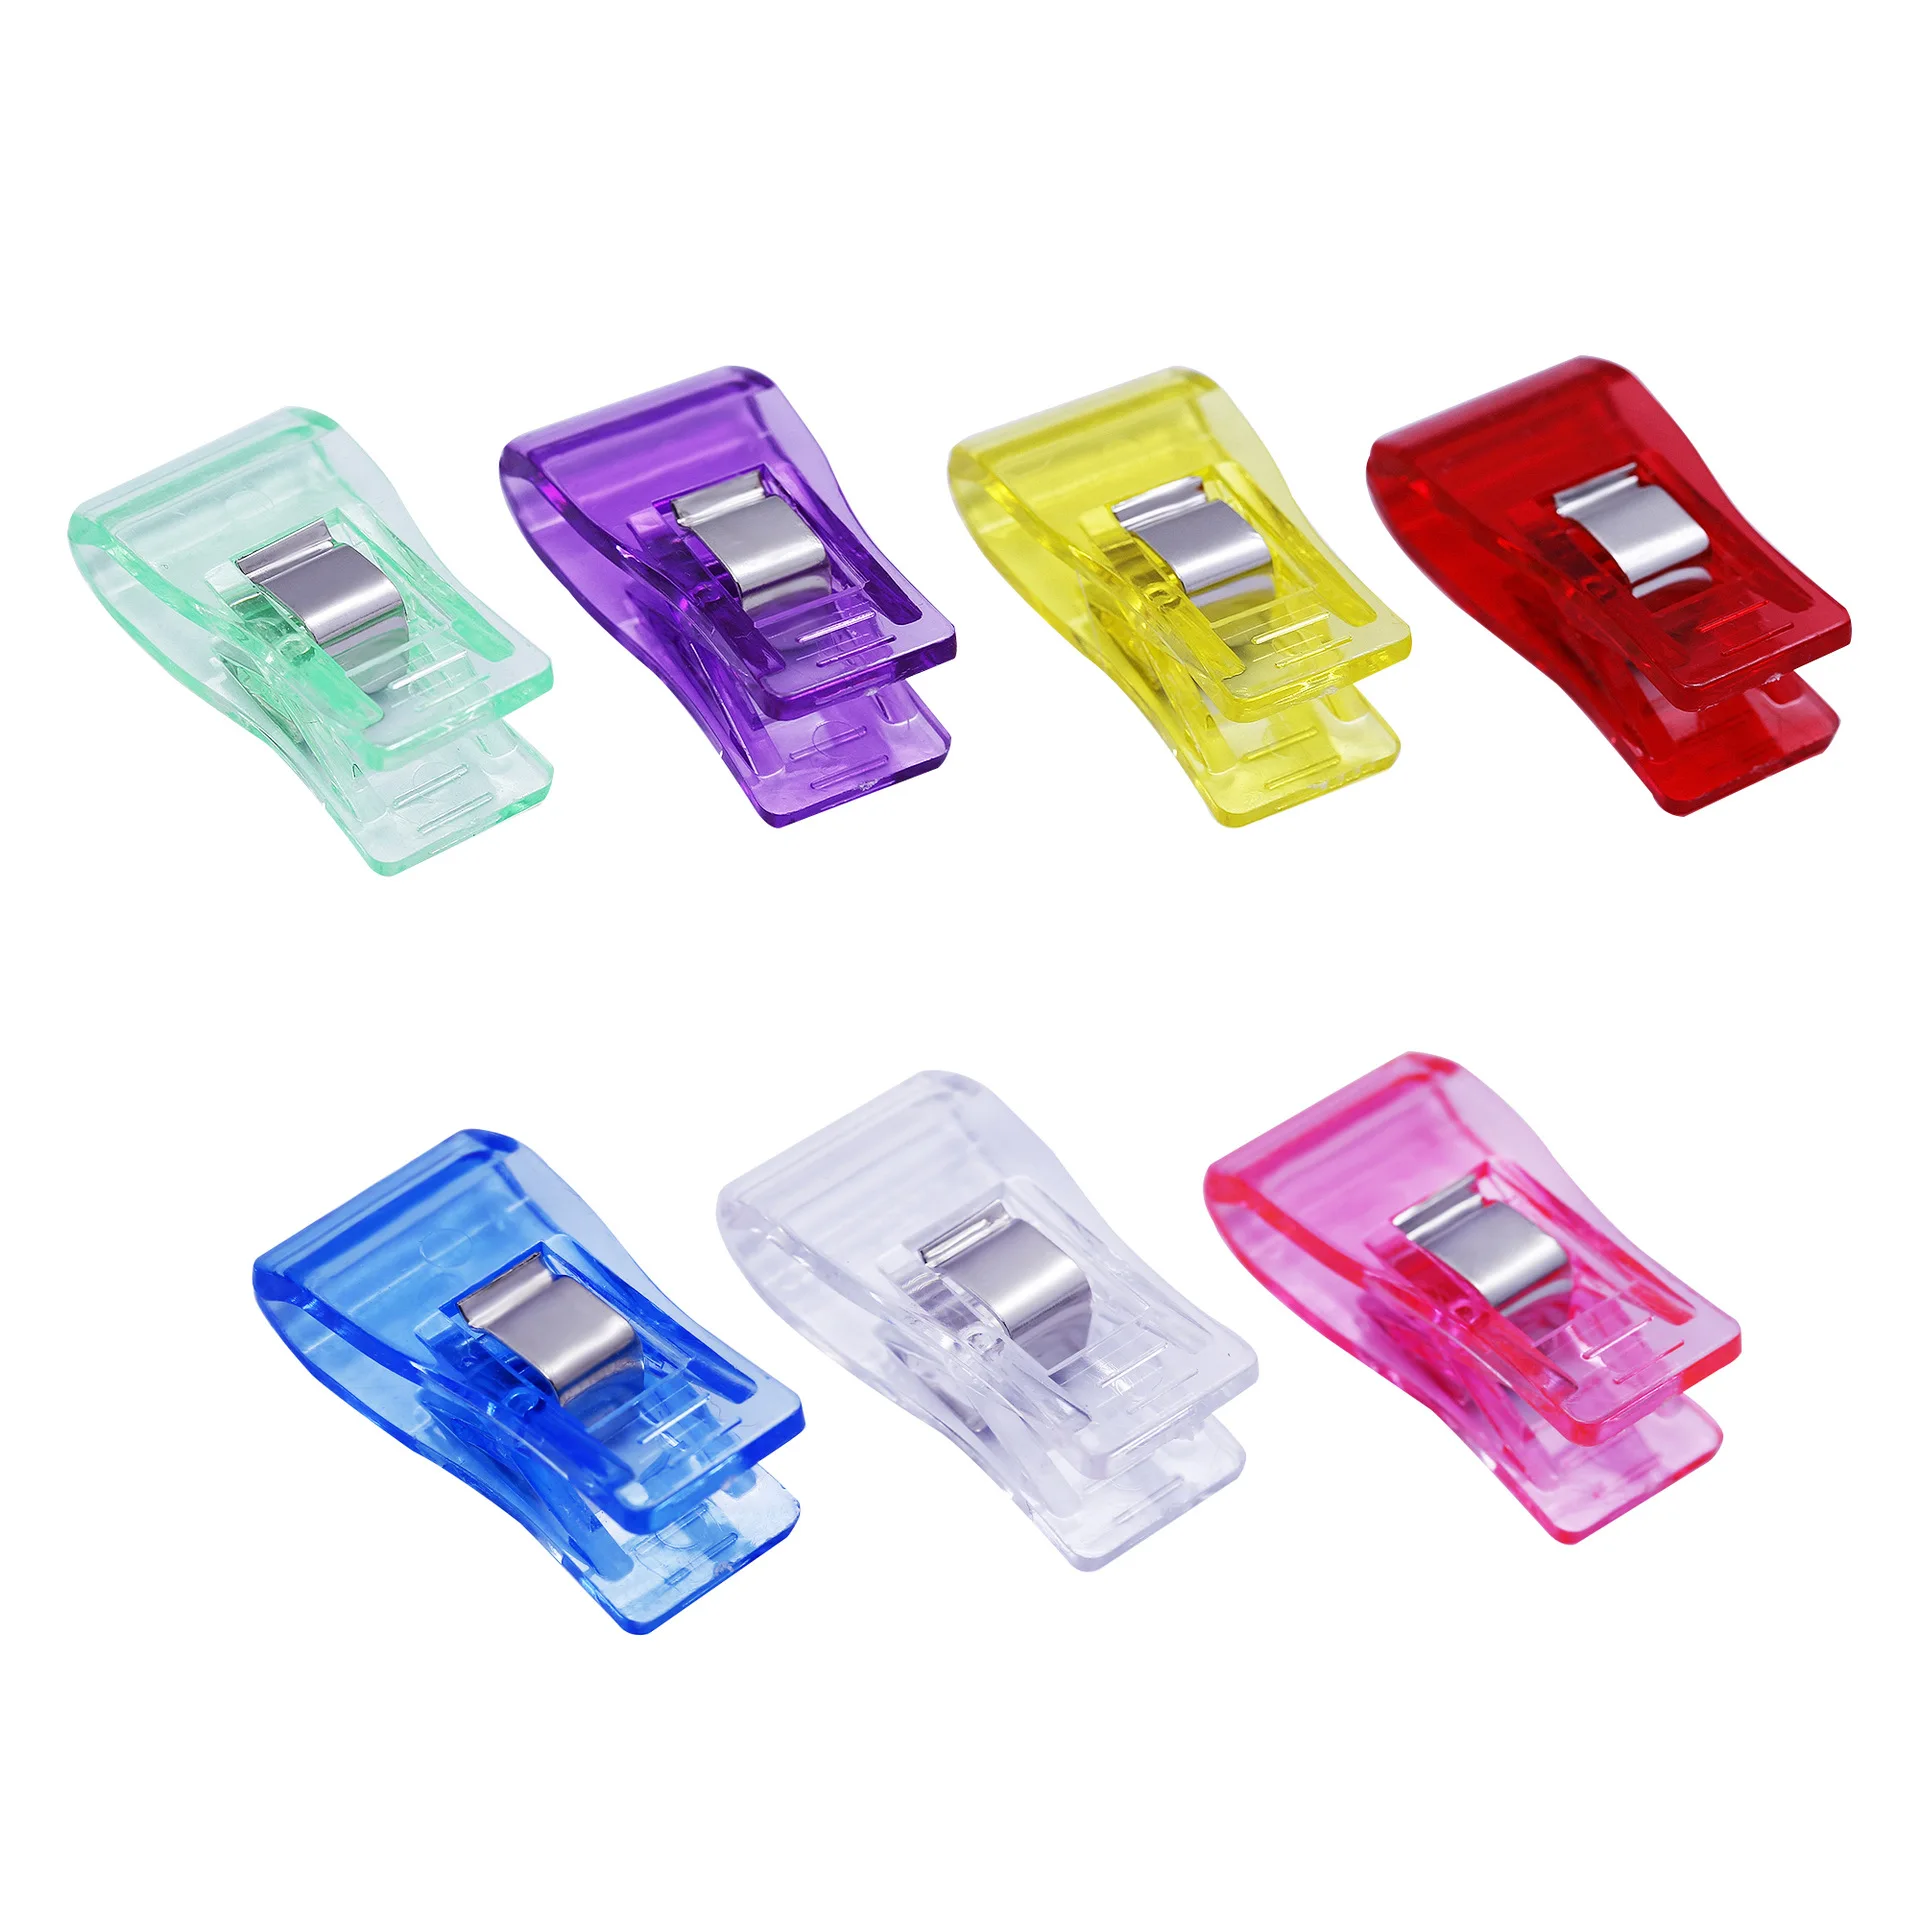 120pcs Plastic Clips For Sewing DIY Crafts, Quilting Clips,Clover